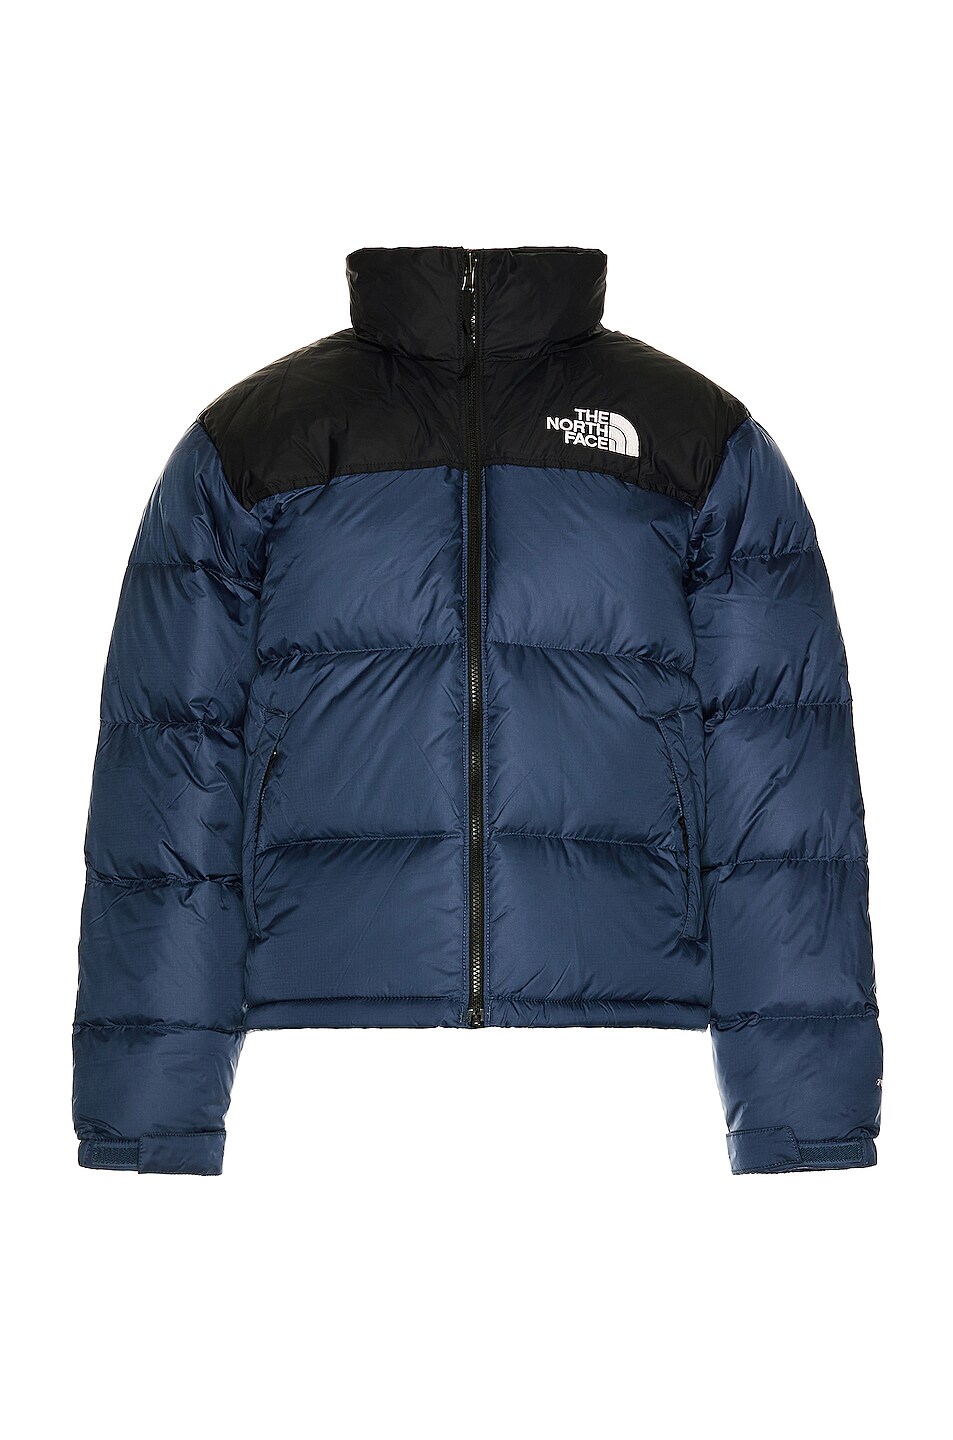 Image 1 of The North Face 1996 Retro Nuptse Jacket in Shady Blue